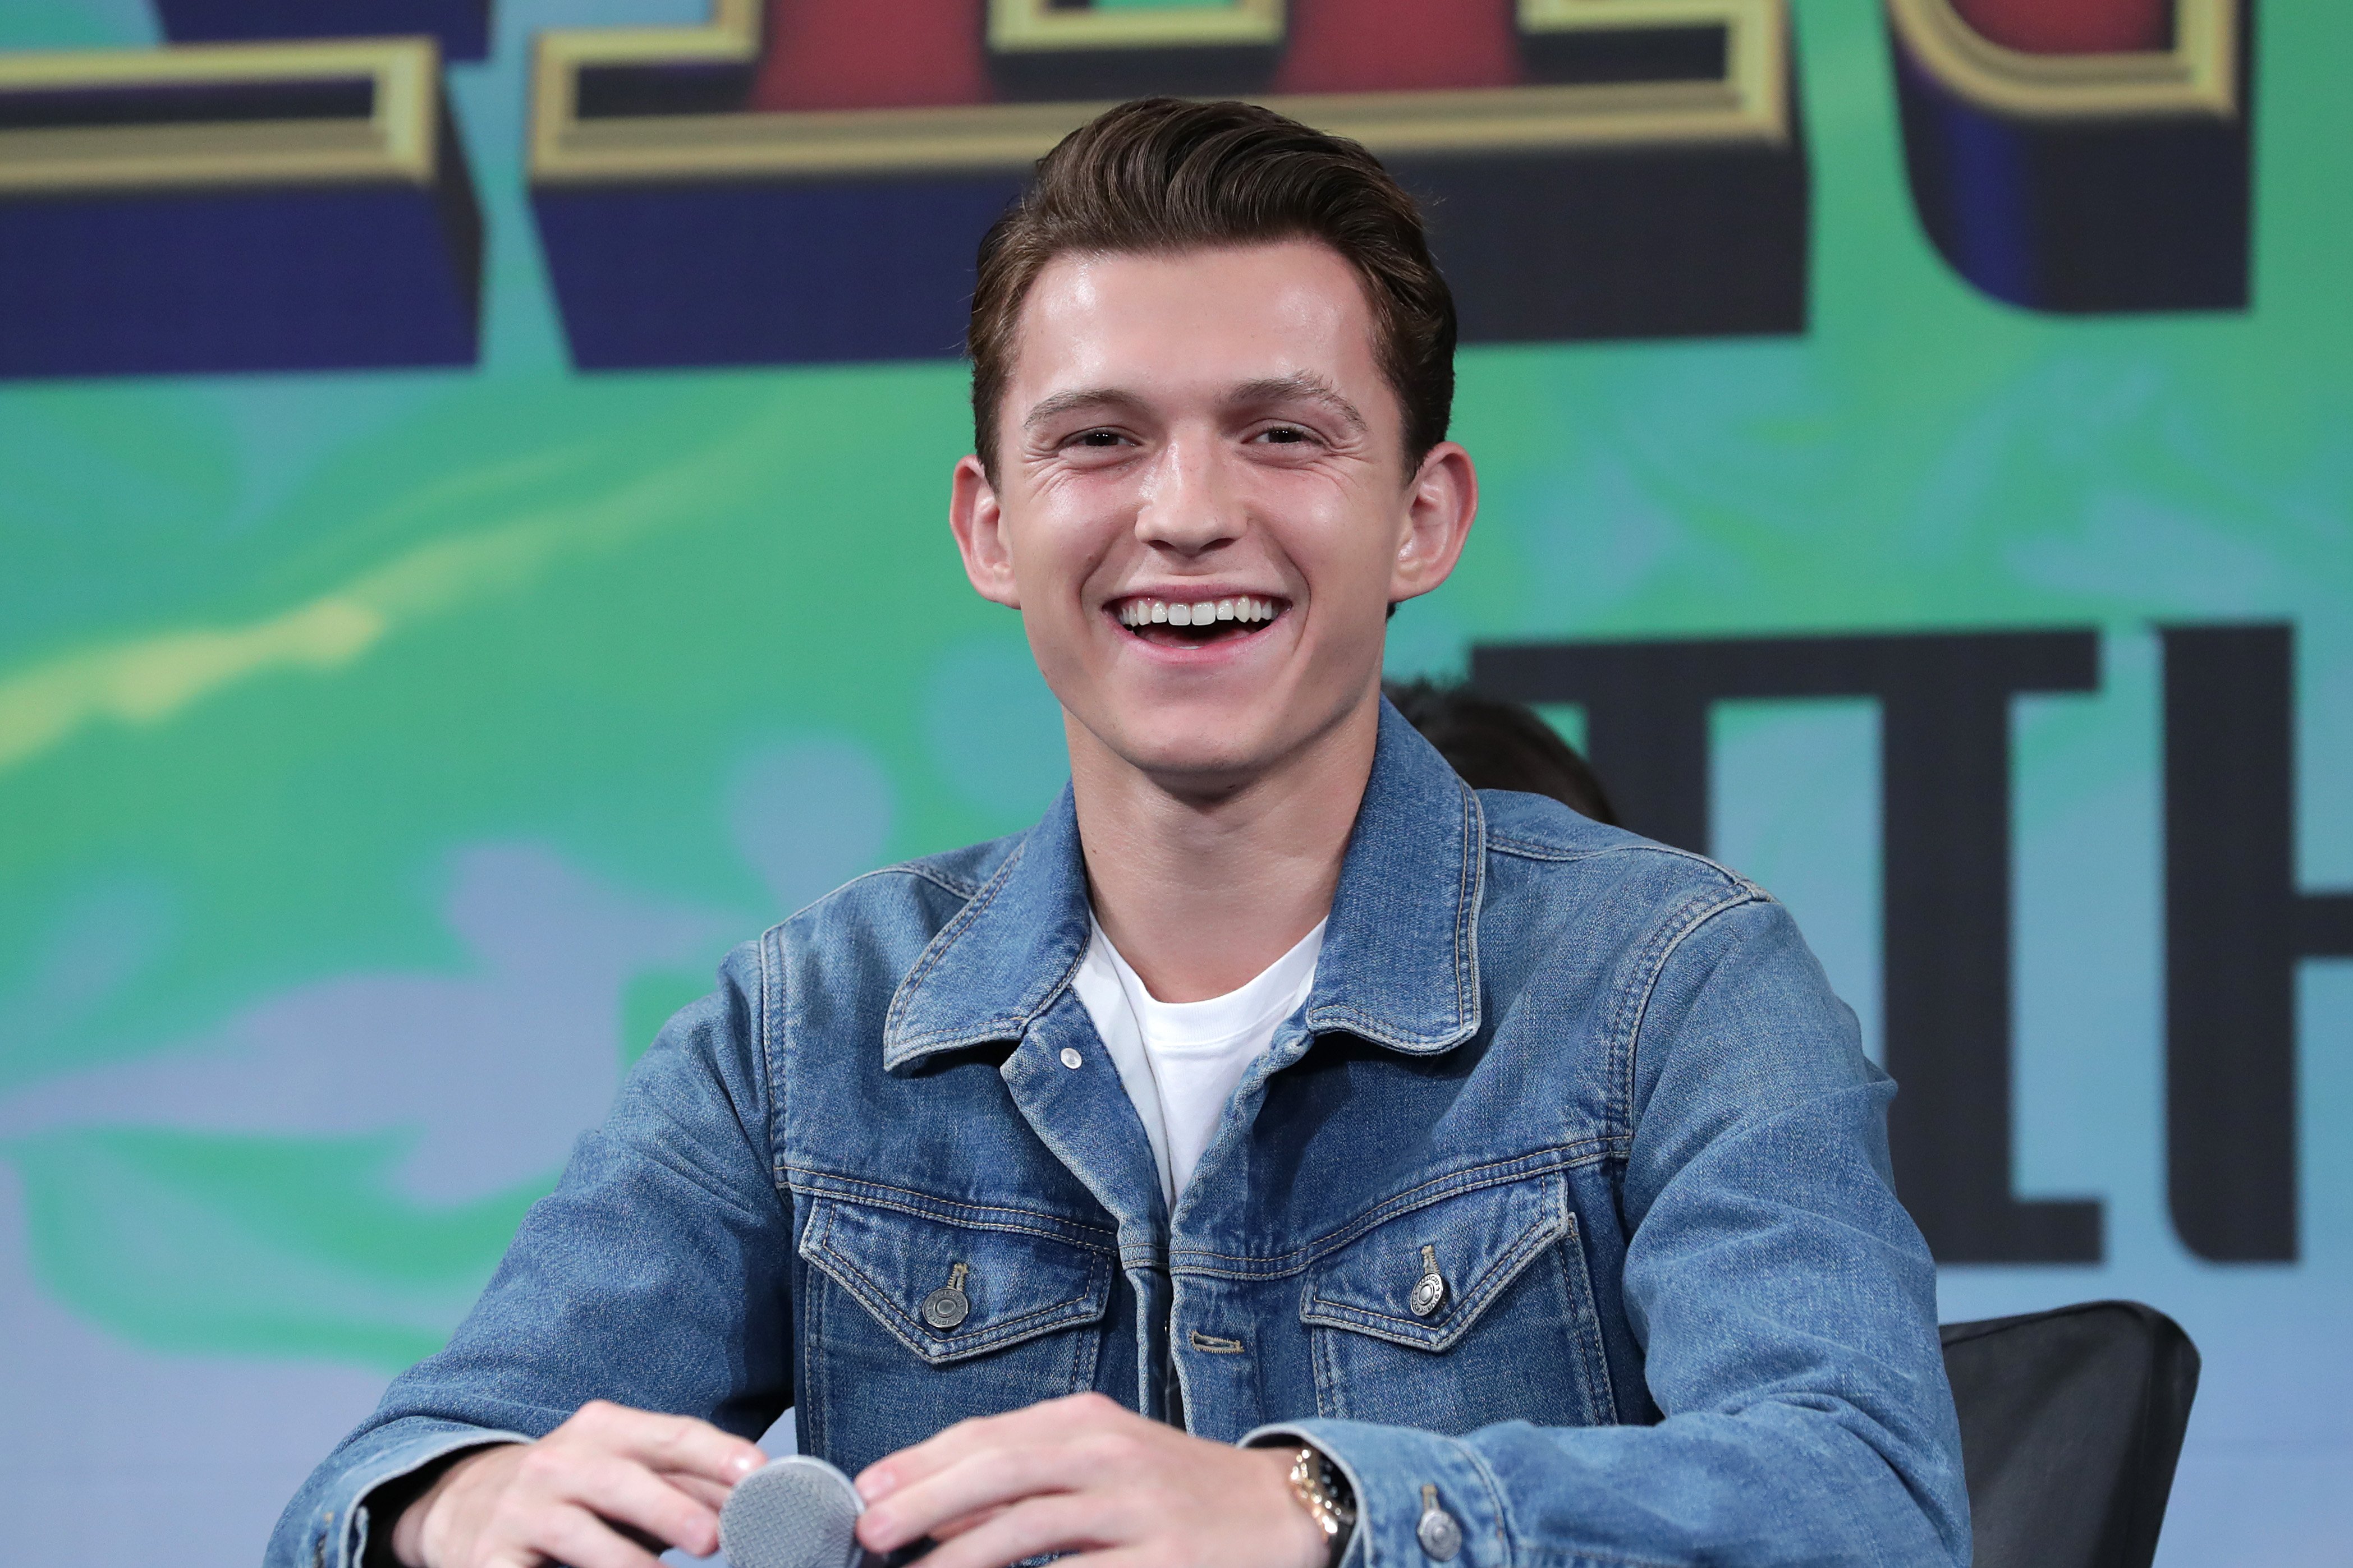 Actor Tom Holland attends the press conference for 'Spider-Man: Far From Home' smiling, seated at a table